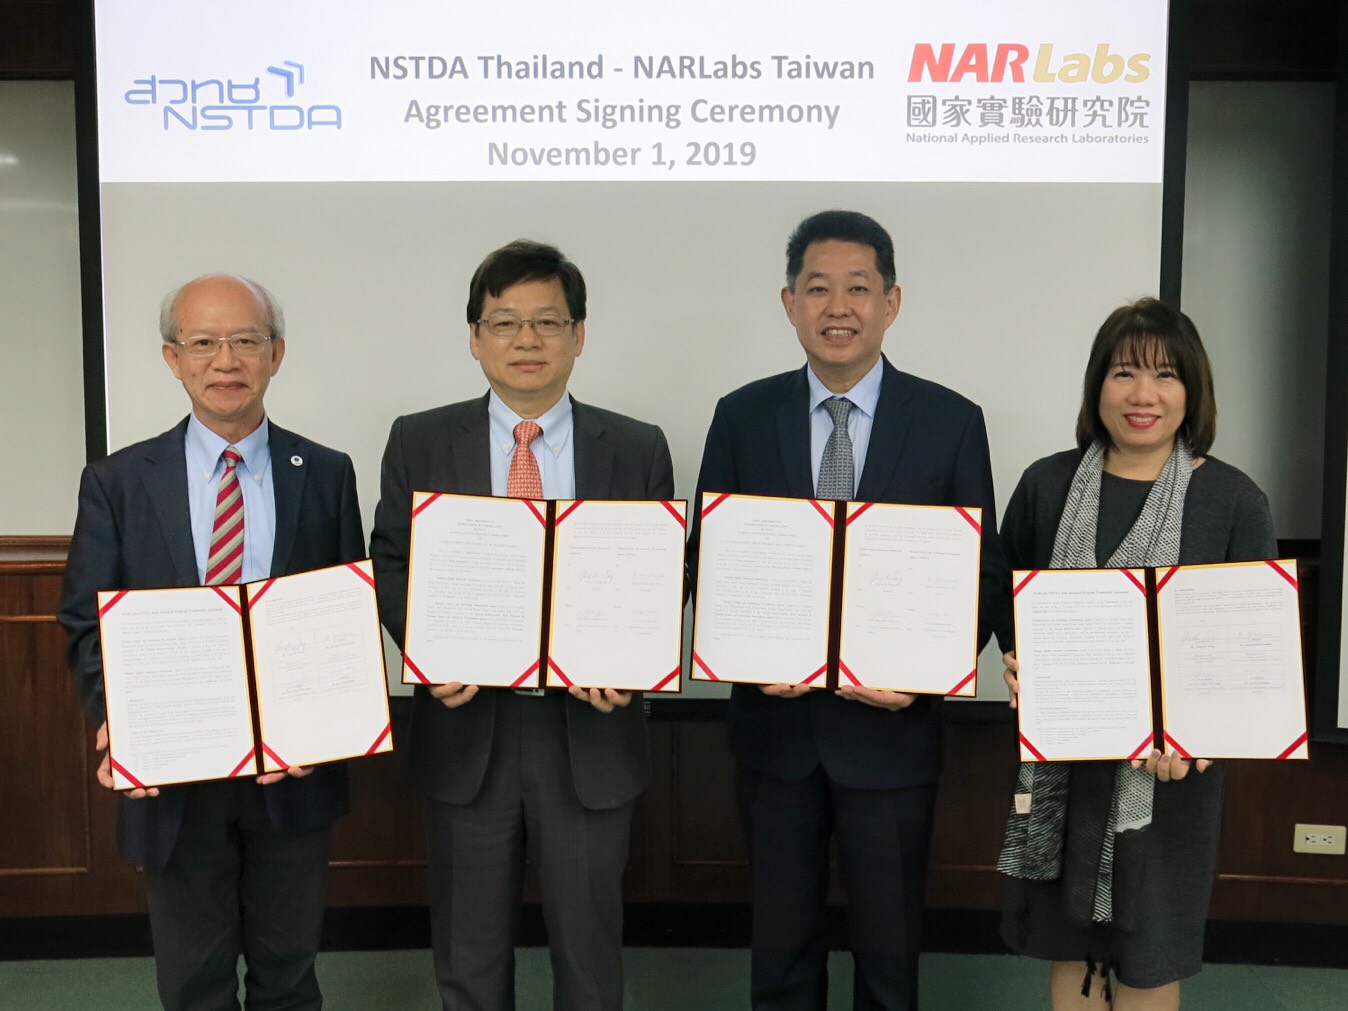 The Agreement was signed by President Yeong-Her Wang of NARLabs and President Narong Sirilertworakul of NSTDA under the witness of Dr. Franz Ming-Chih Cheng, Director of International Affairs Office, NARLabs and Dr. Lily Eurwilaichitr, Vice President for International Collaboration, NSTDA. 